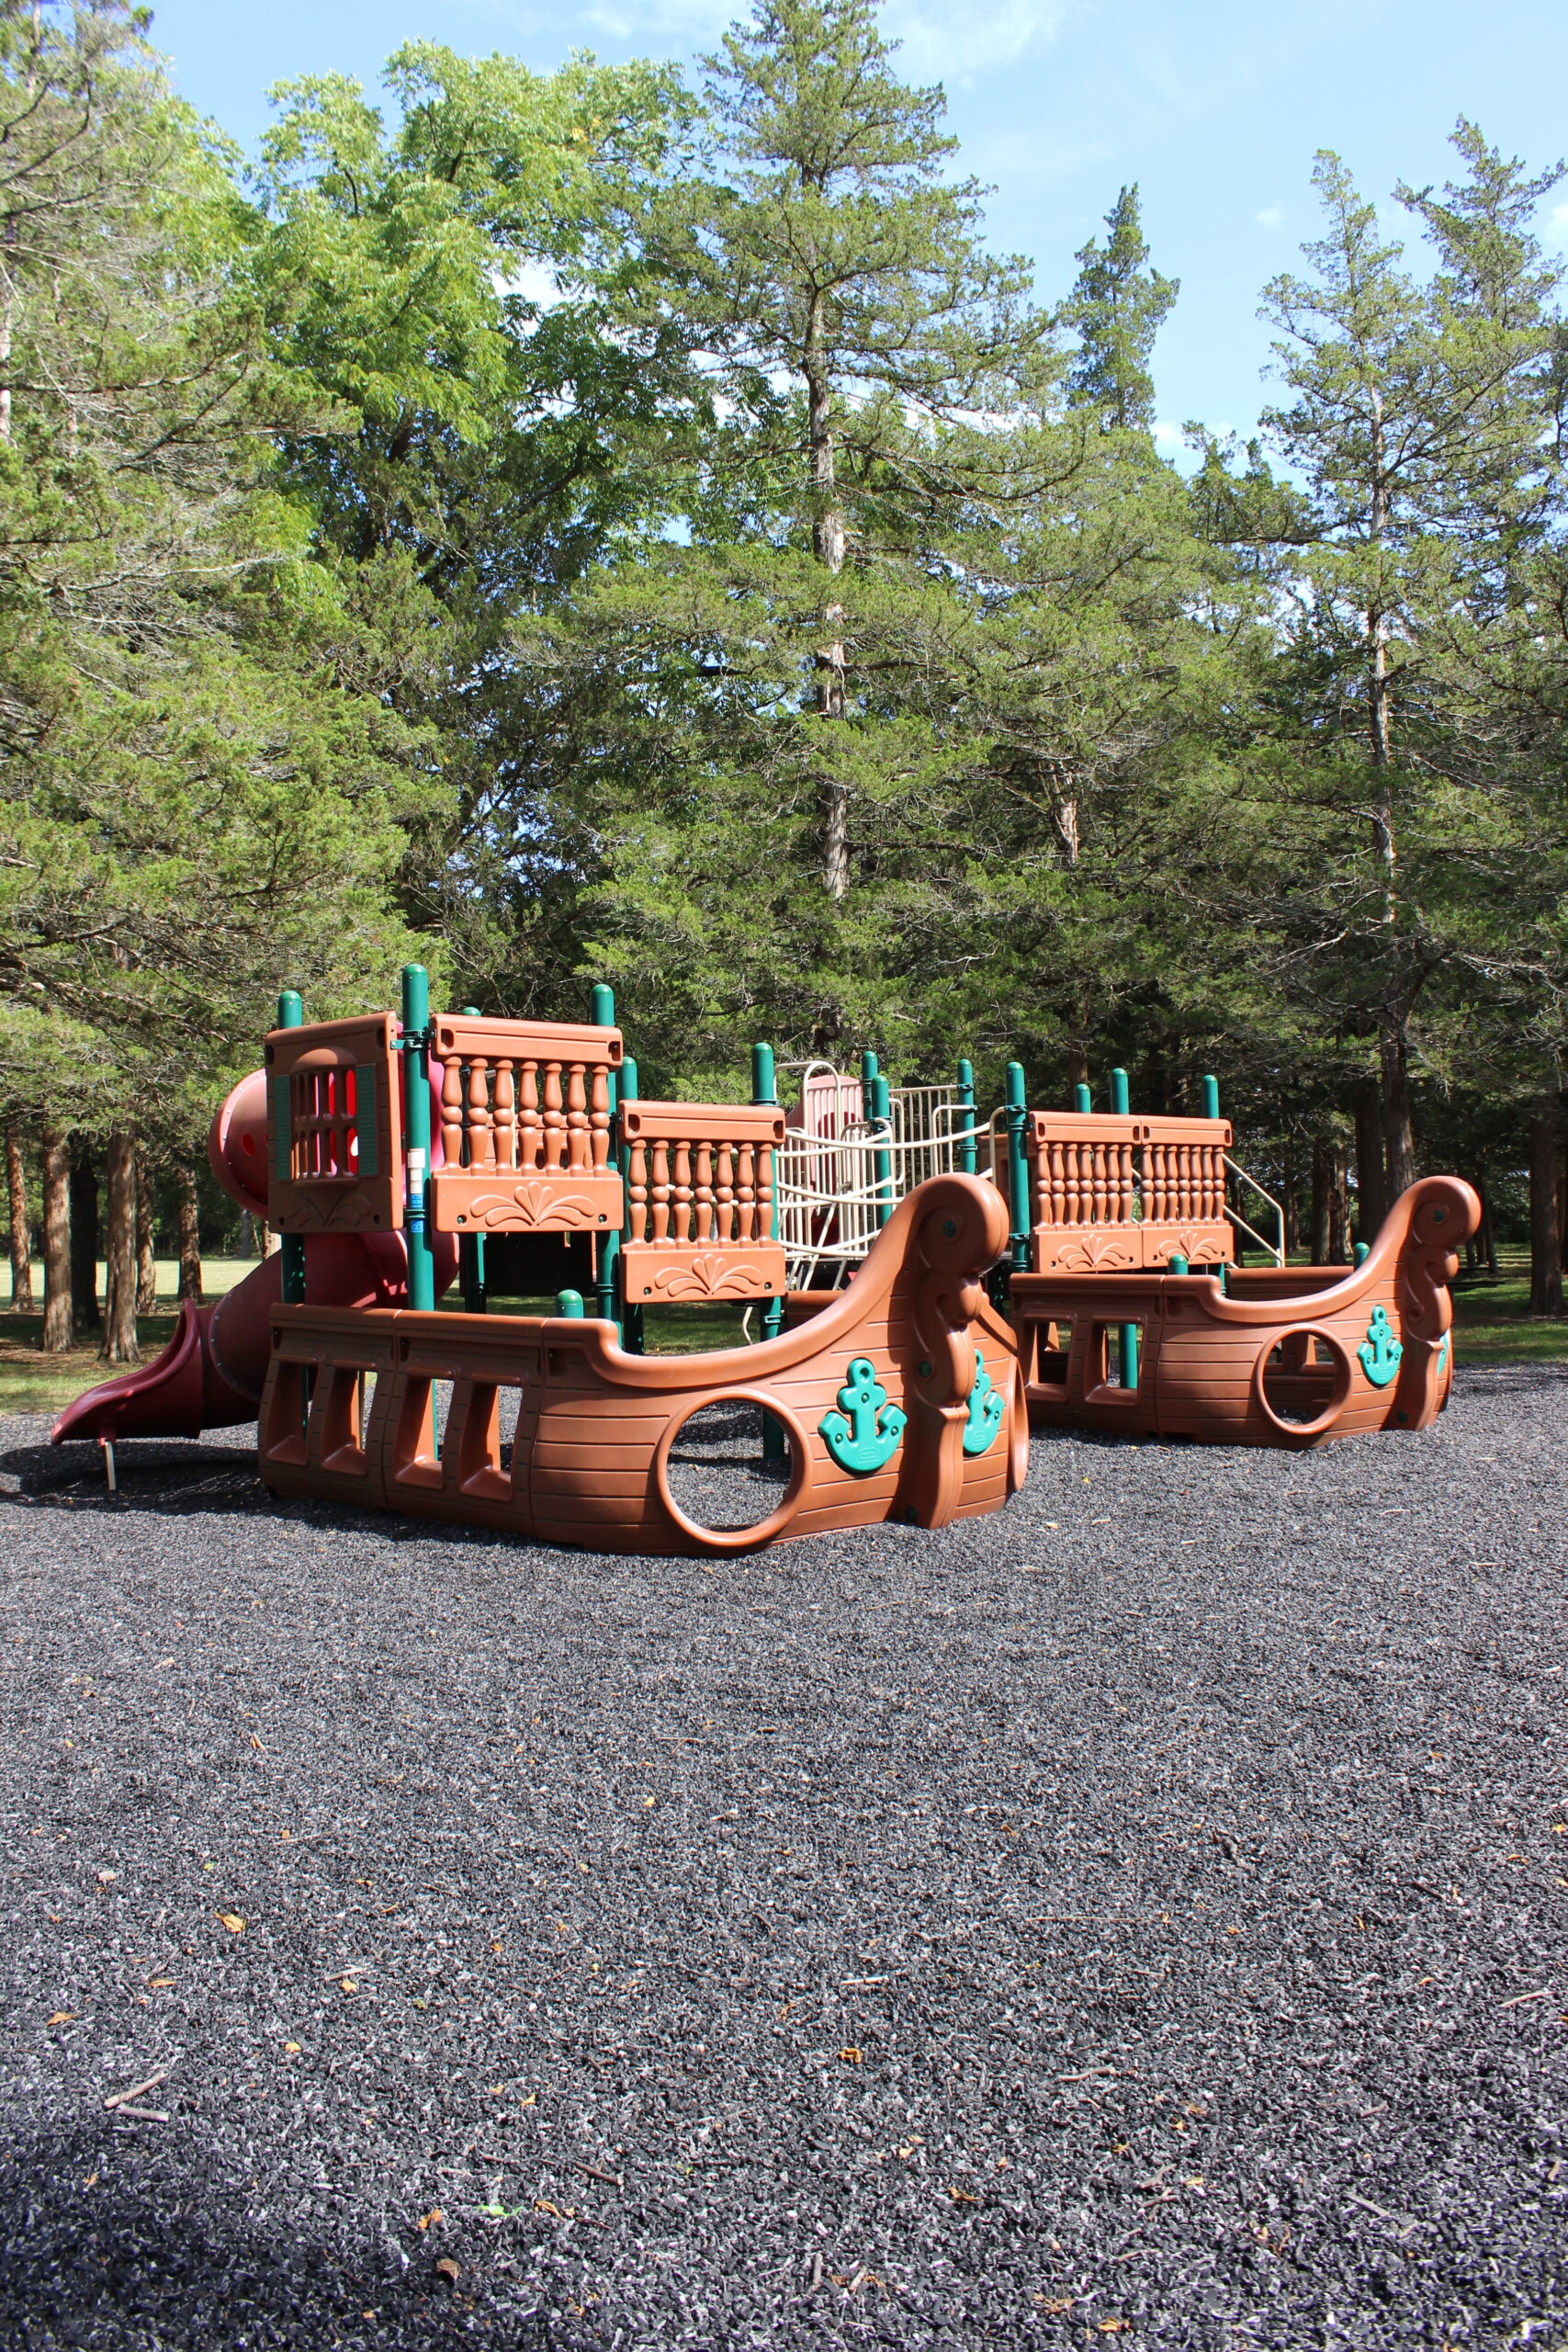 Back Estell Manor Park Playgrounds in Mays Landing NJ - TALL image - pirate ship playground